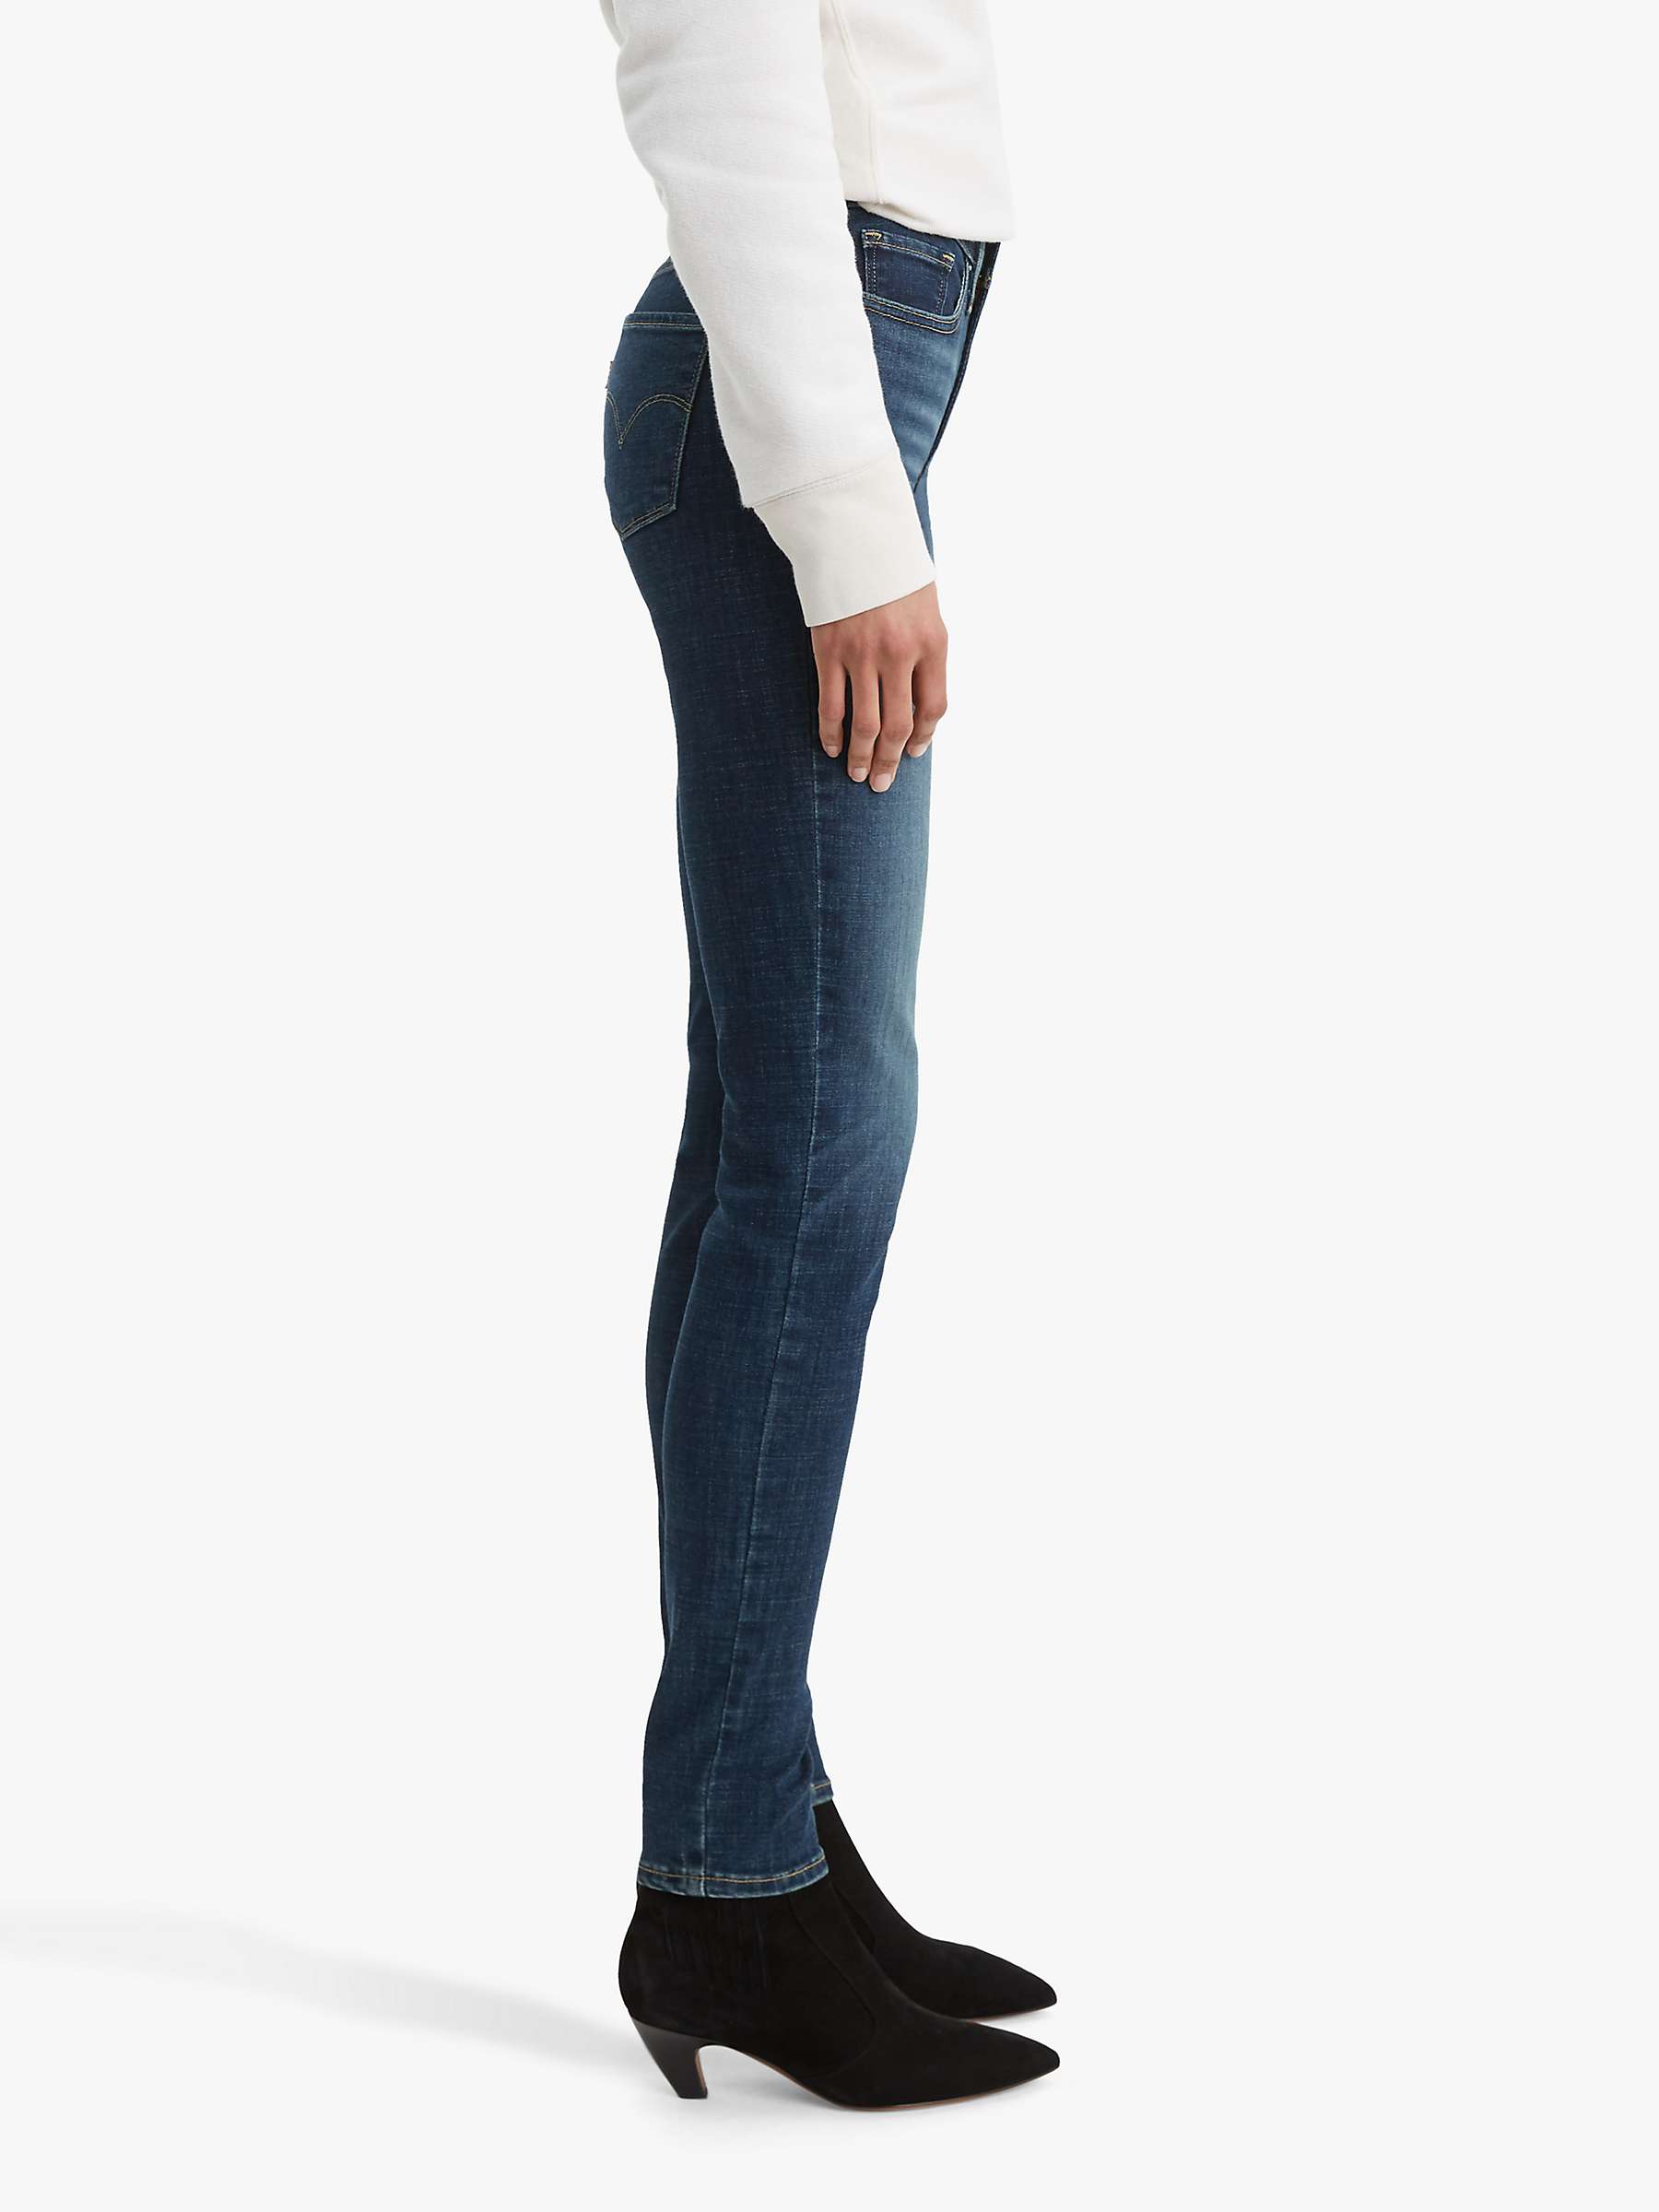 Buy Levi's 311 Shaping Skinny Jeans Online at johnlewis.com